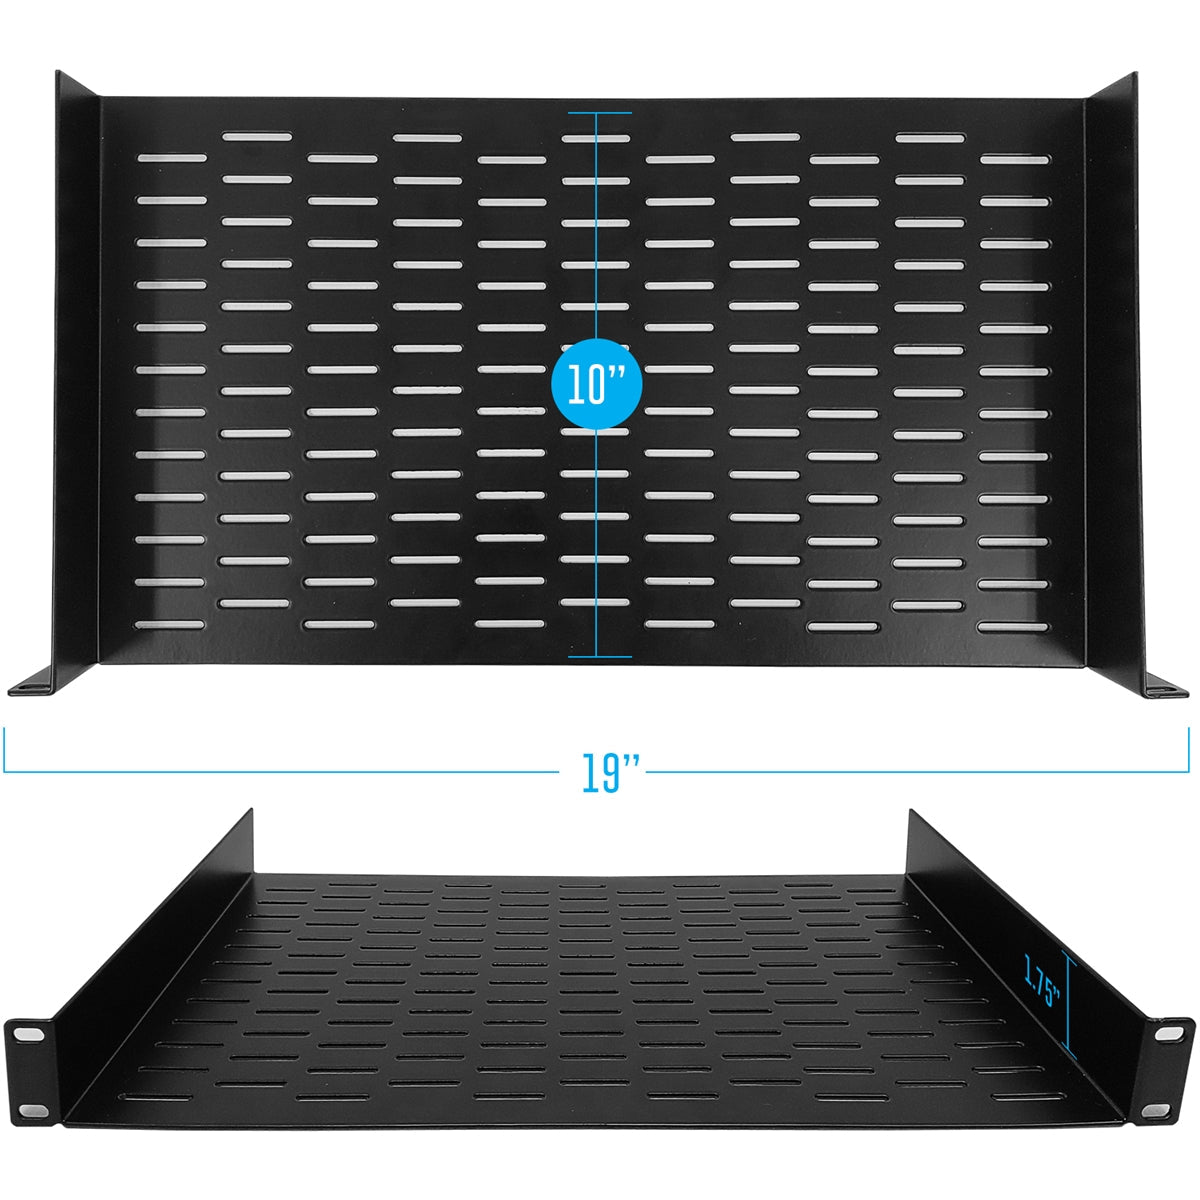 AxcessAbles 1U Vented AV Cantilever Rack Shelf for 19 Inch Equipment Rack & IT Cabinets. No Front/Back Edges. 10 Inches Deep. 44LB Capacity